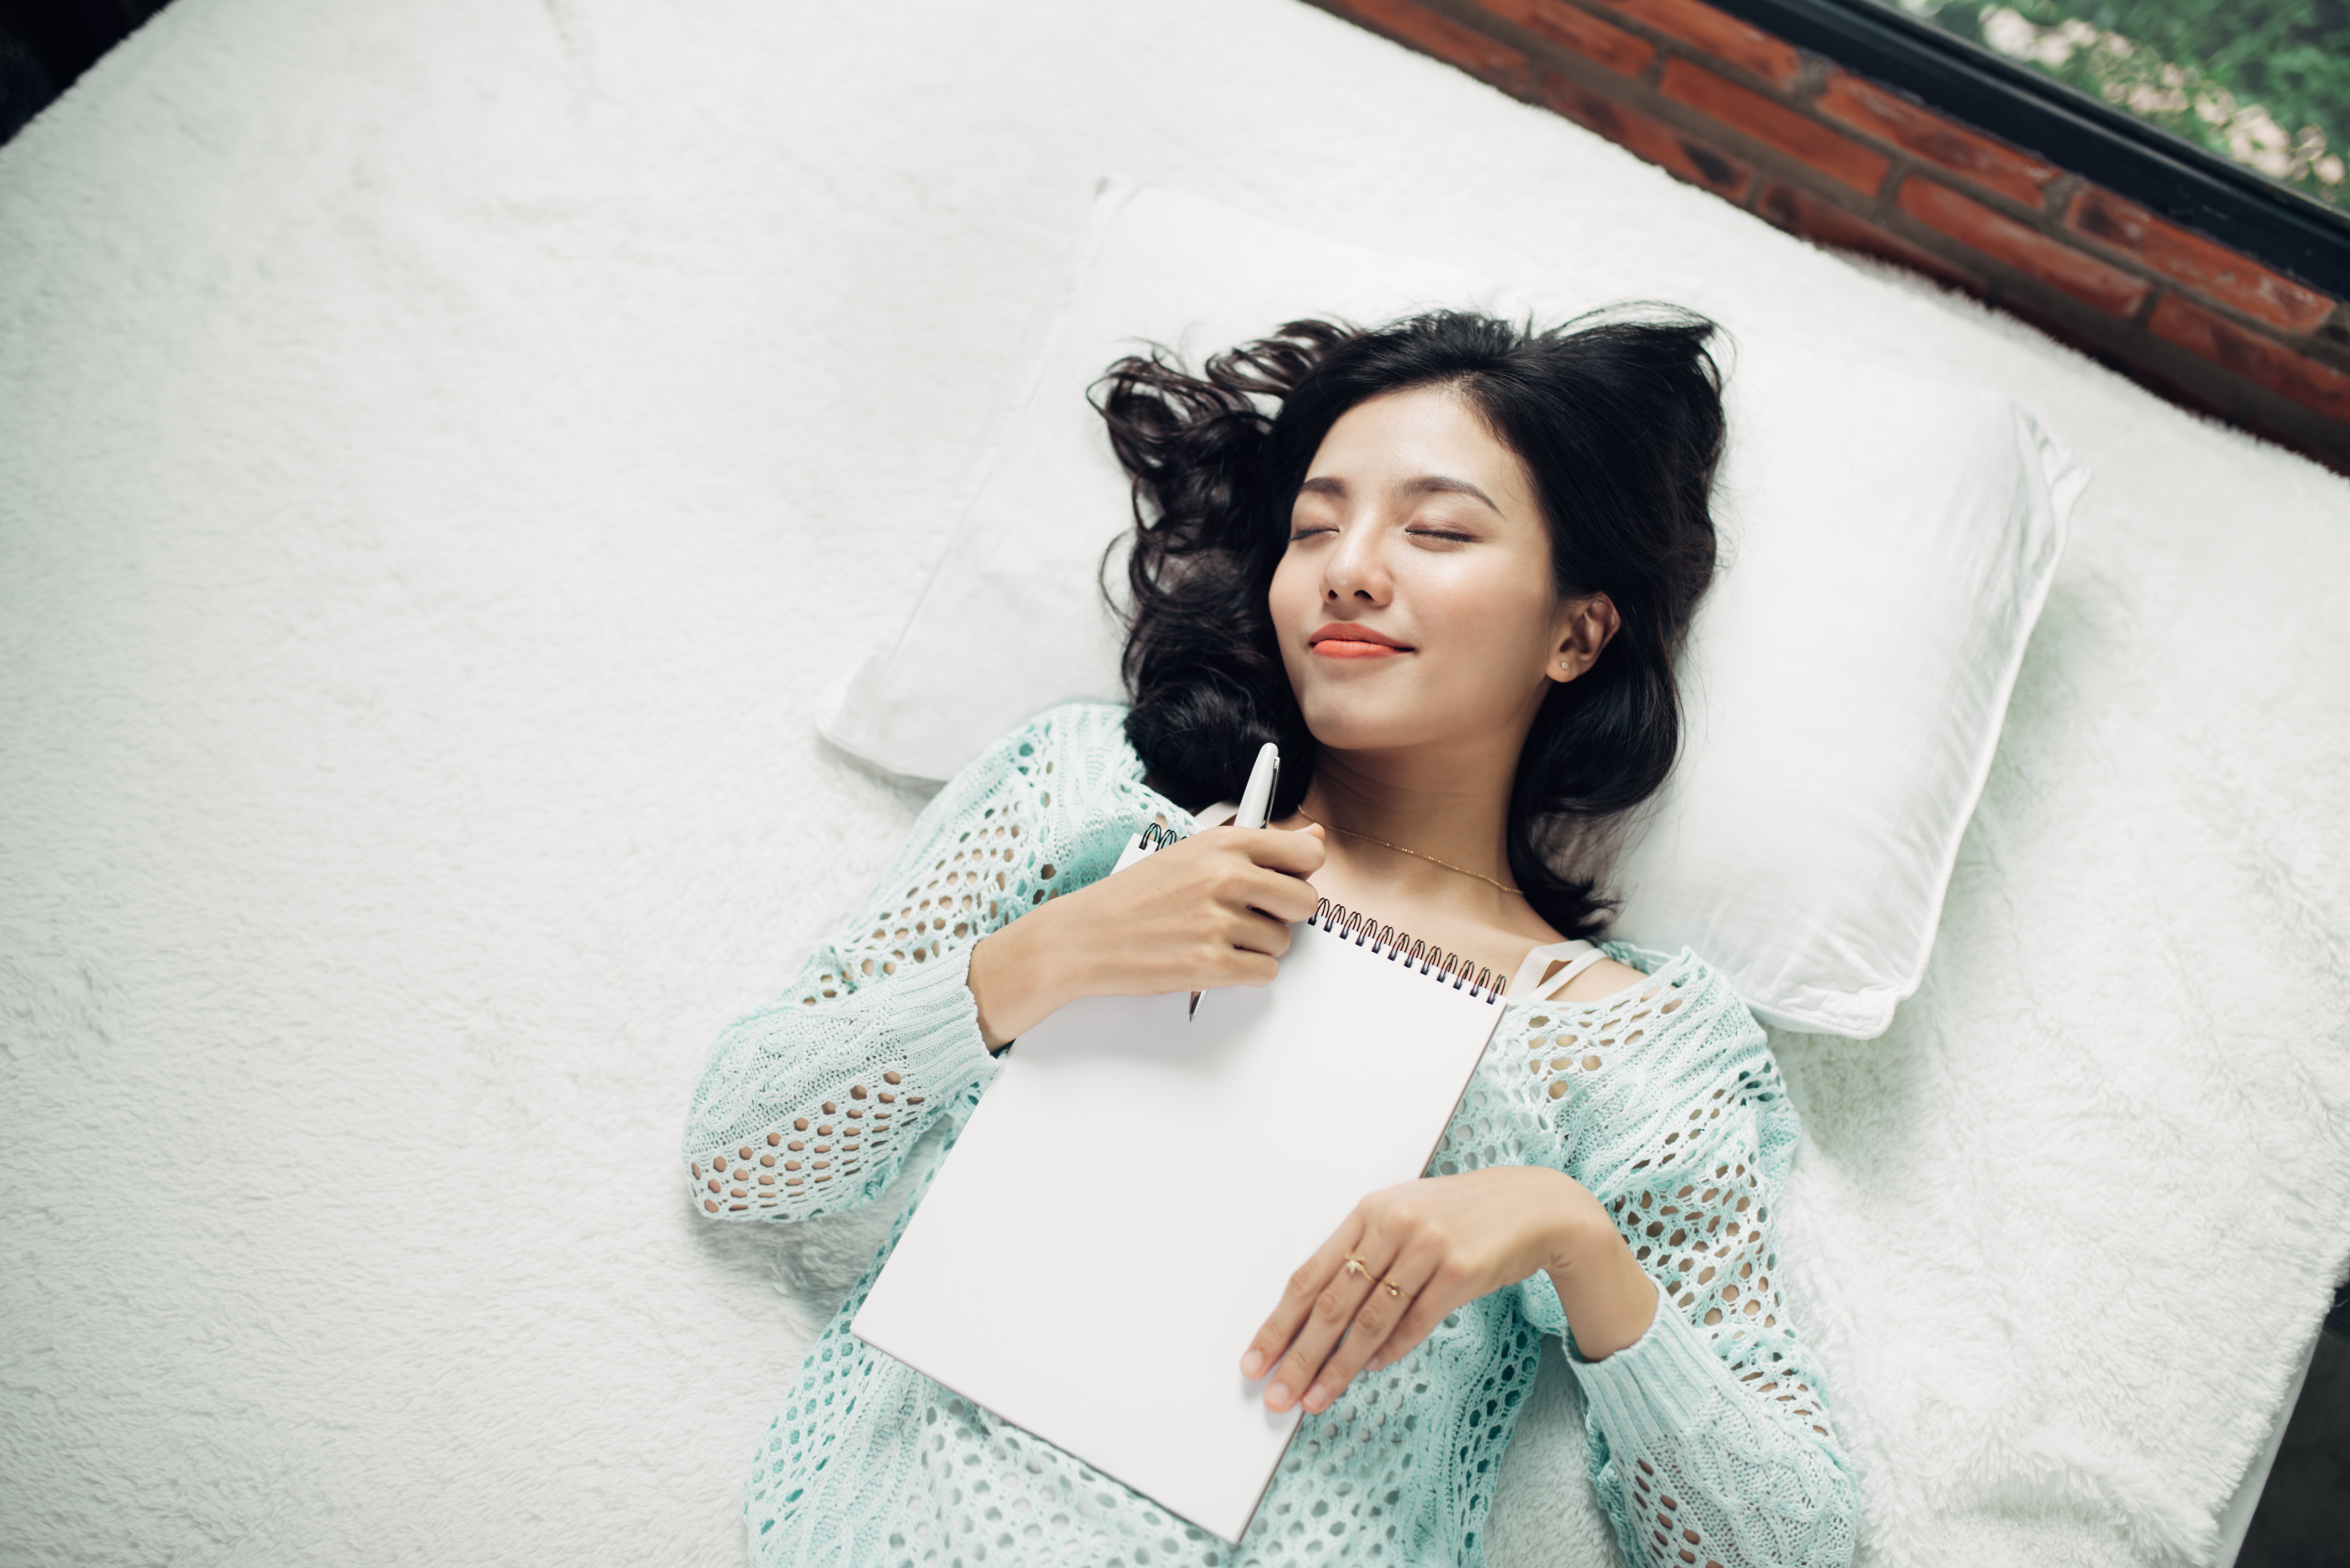 Woman lying back on a bed with her eyes closed and smiling. She clasps a pen in one hand and a notepad rests on her chest.